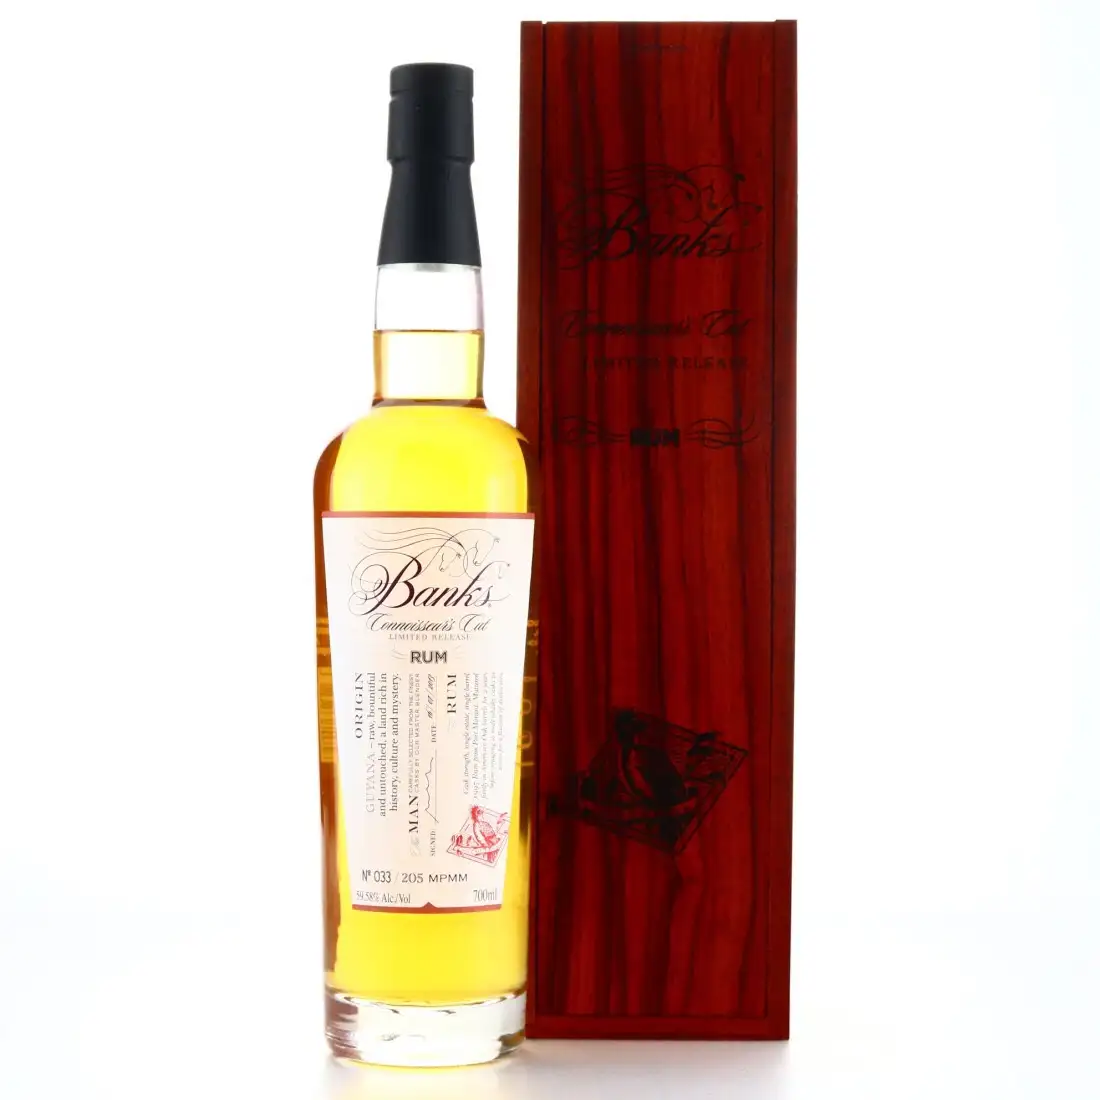 Image of the front of the bottle of the rum Connoisseur‘s Cut MPMM